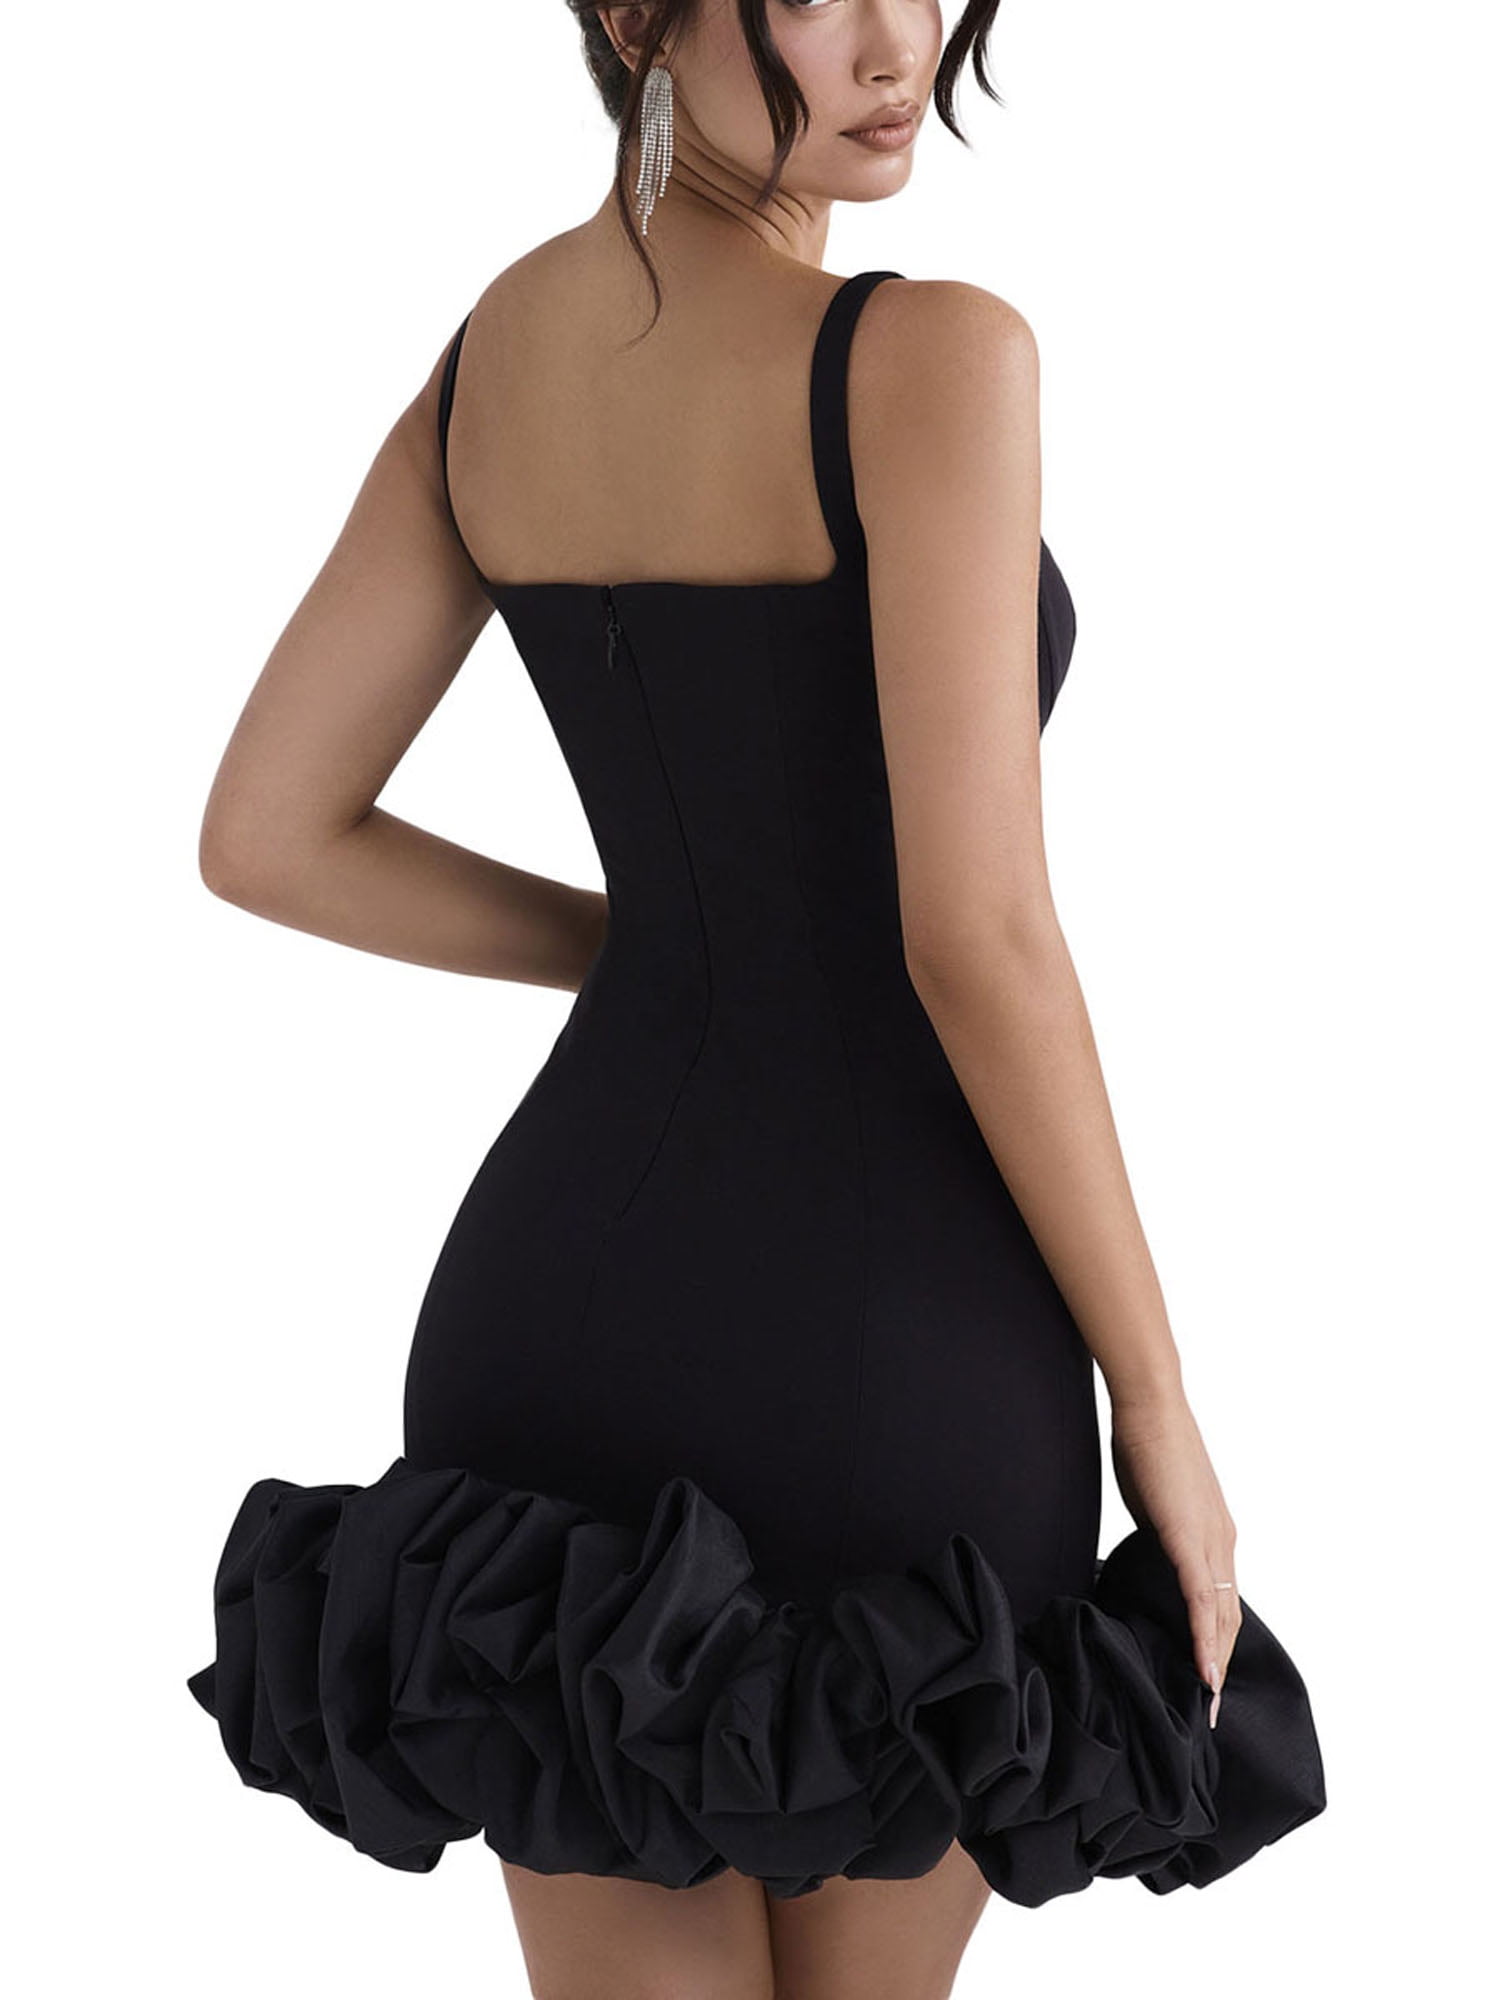 dress with ruffles at the bottom